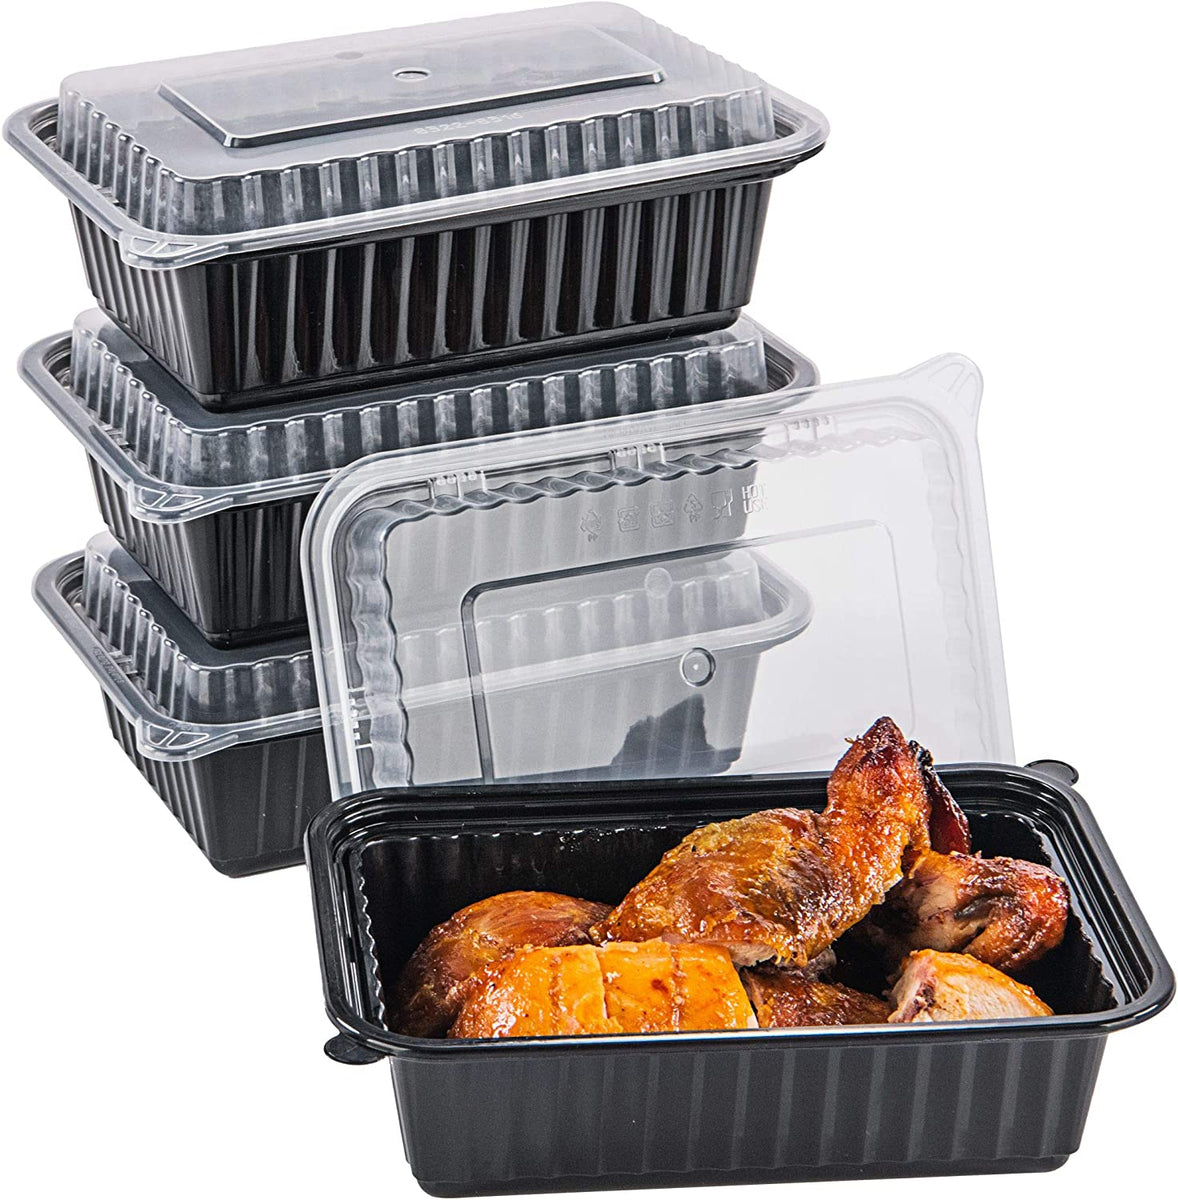 CTC-SPI127B2] 1 Compartment Oval Shape Meal Prep Container with